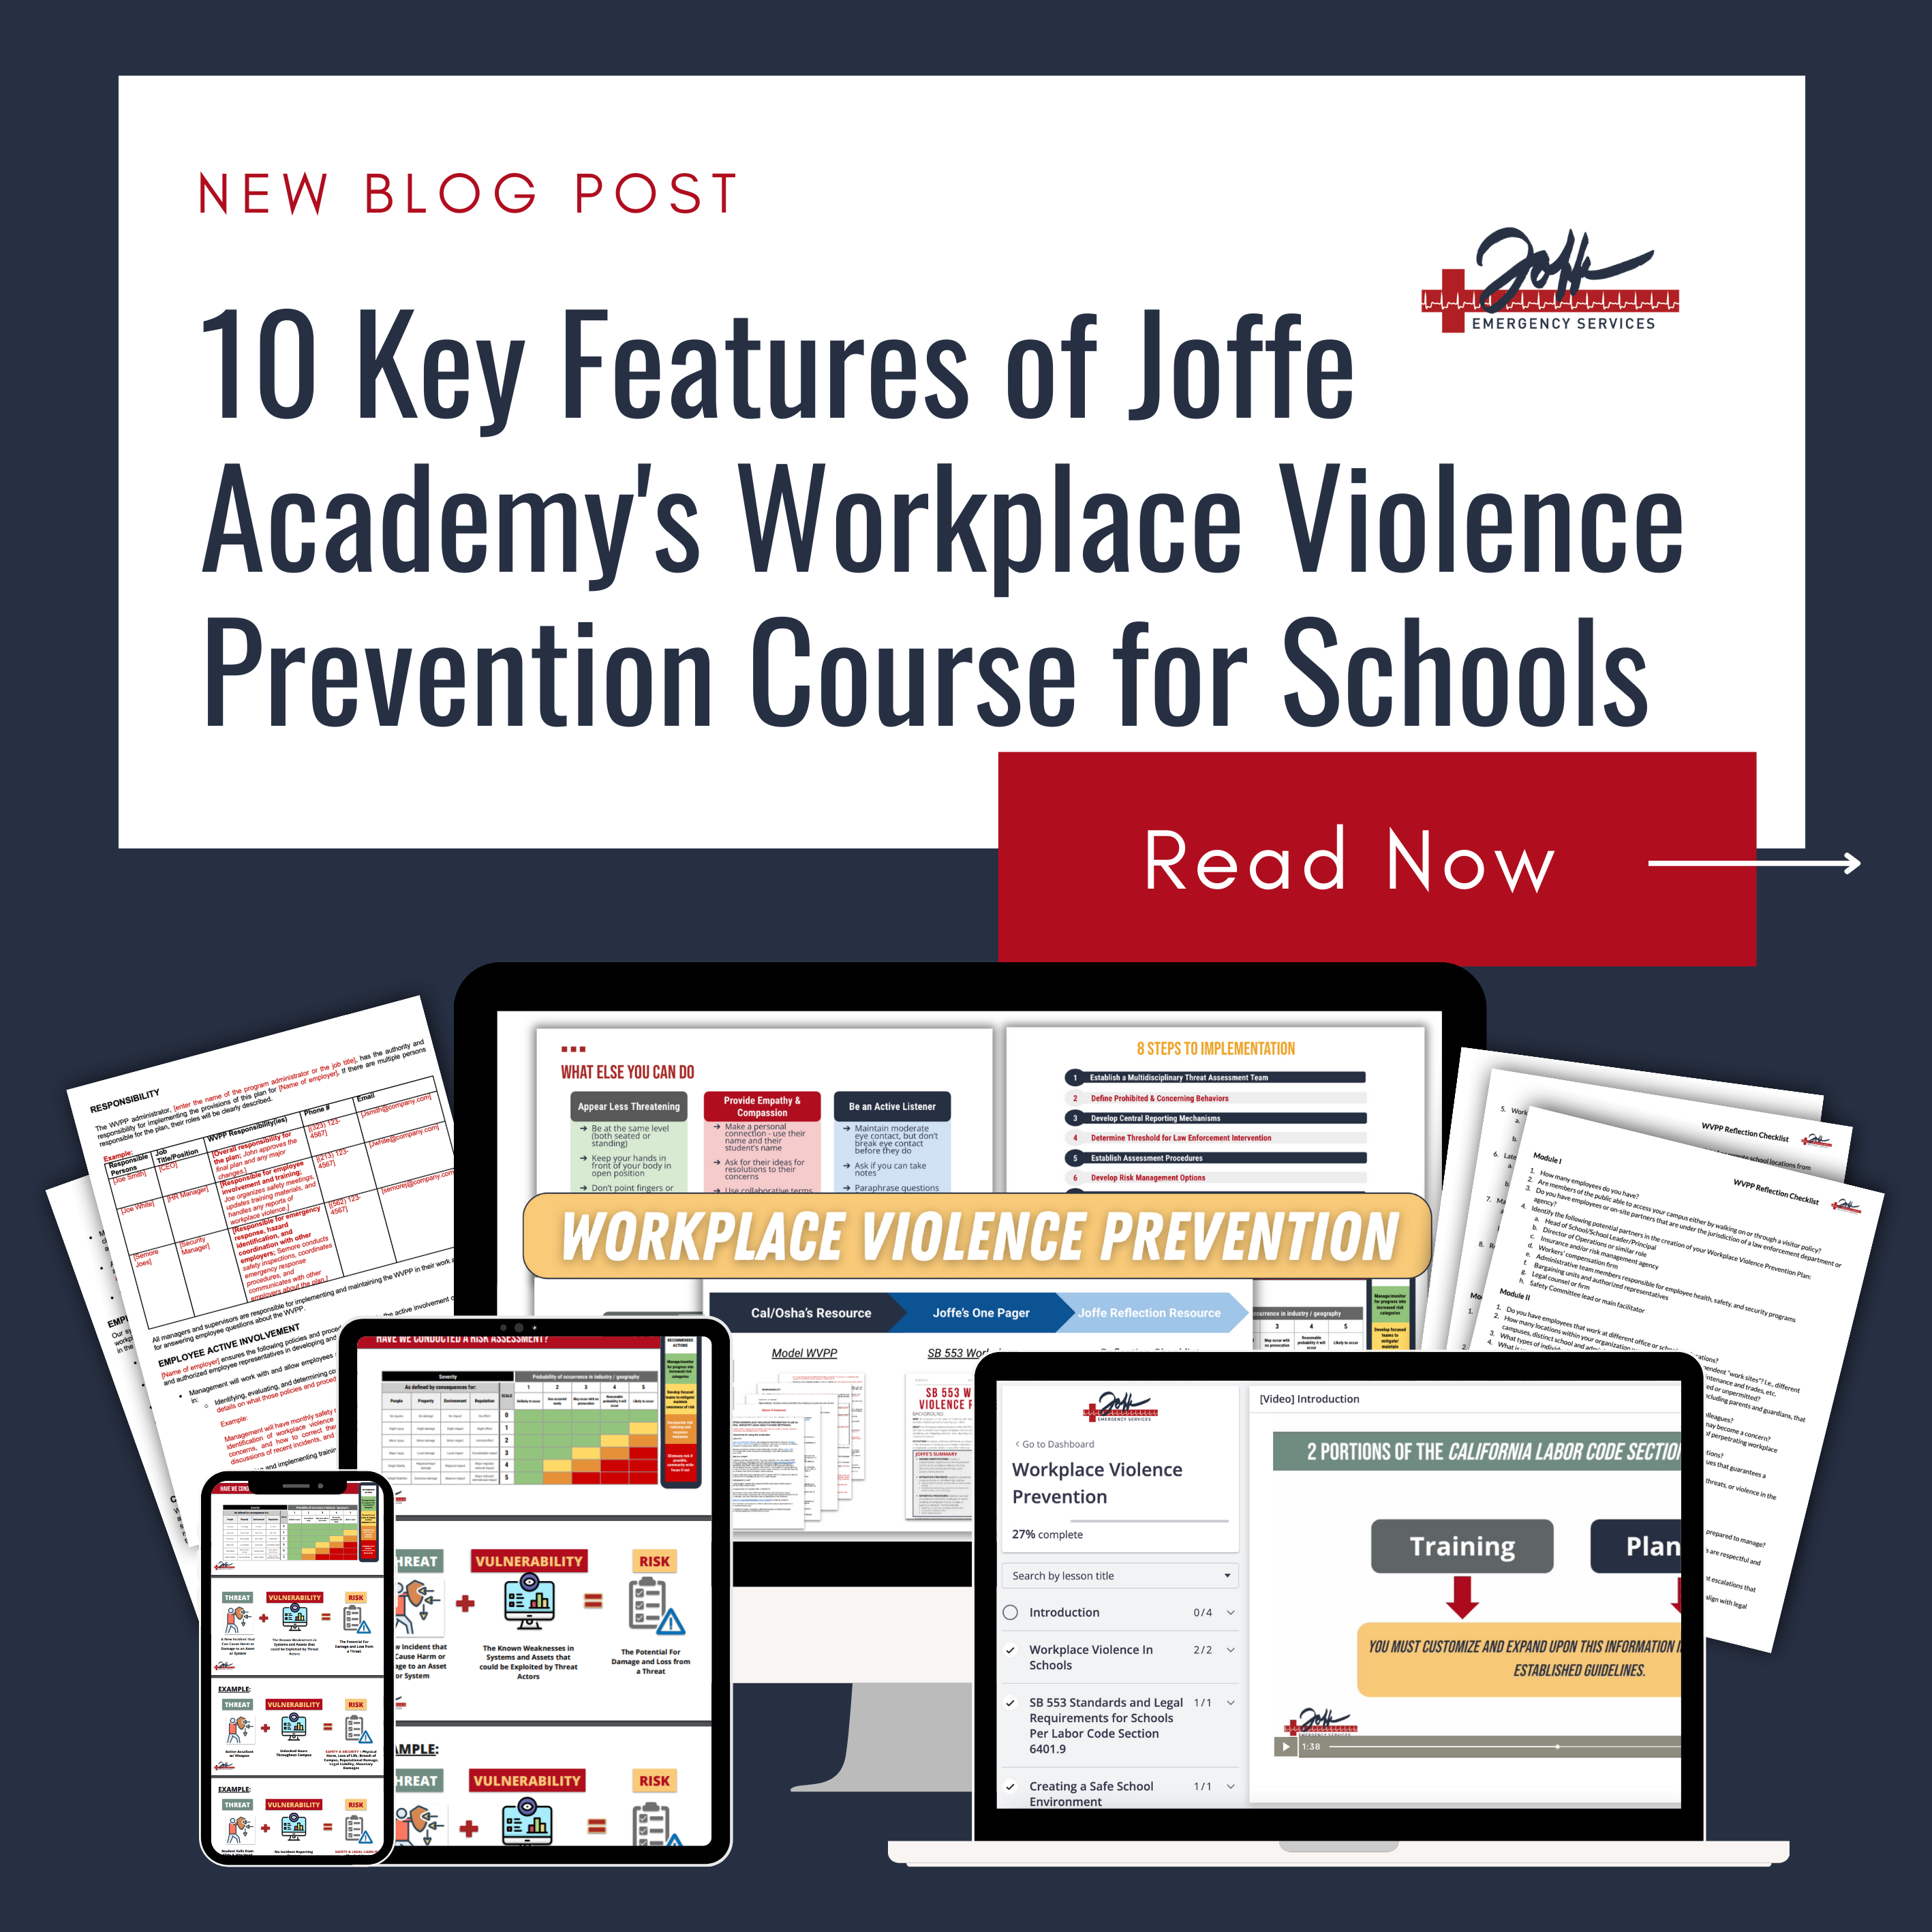 10 Key Features of Joffe Academy's Workplace Violence Prevention Course for Schools